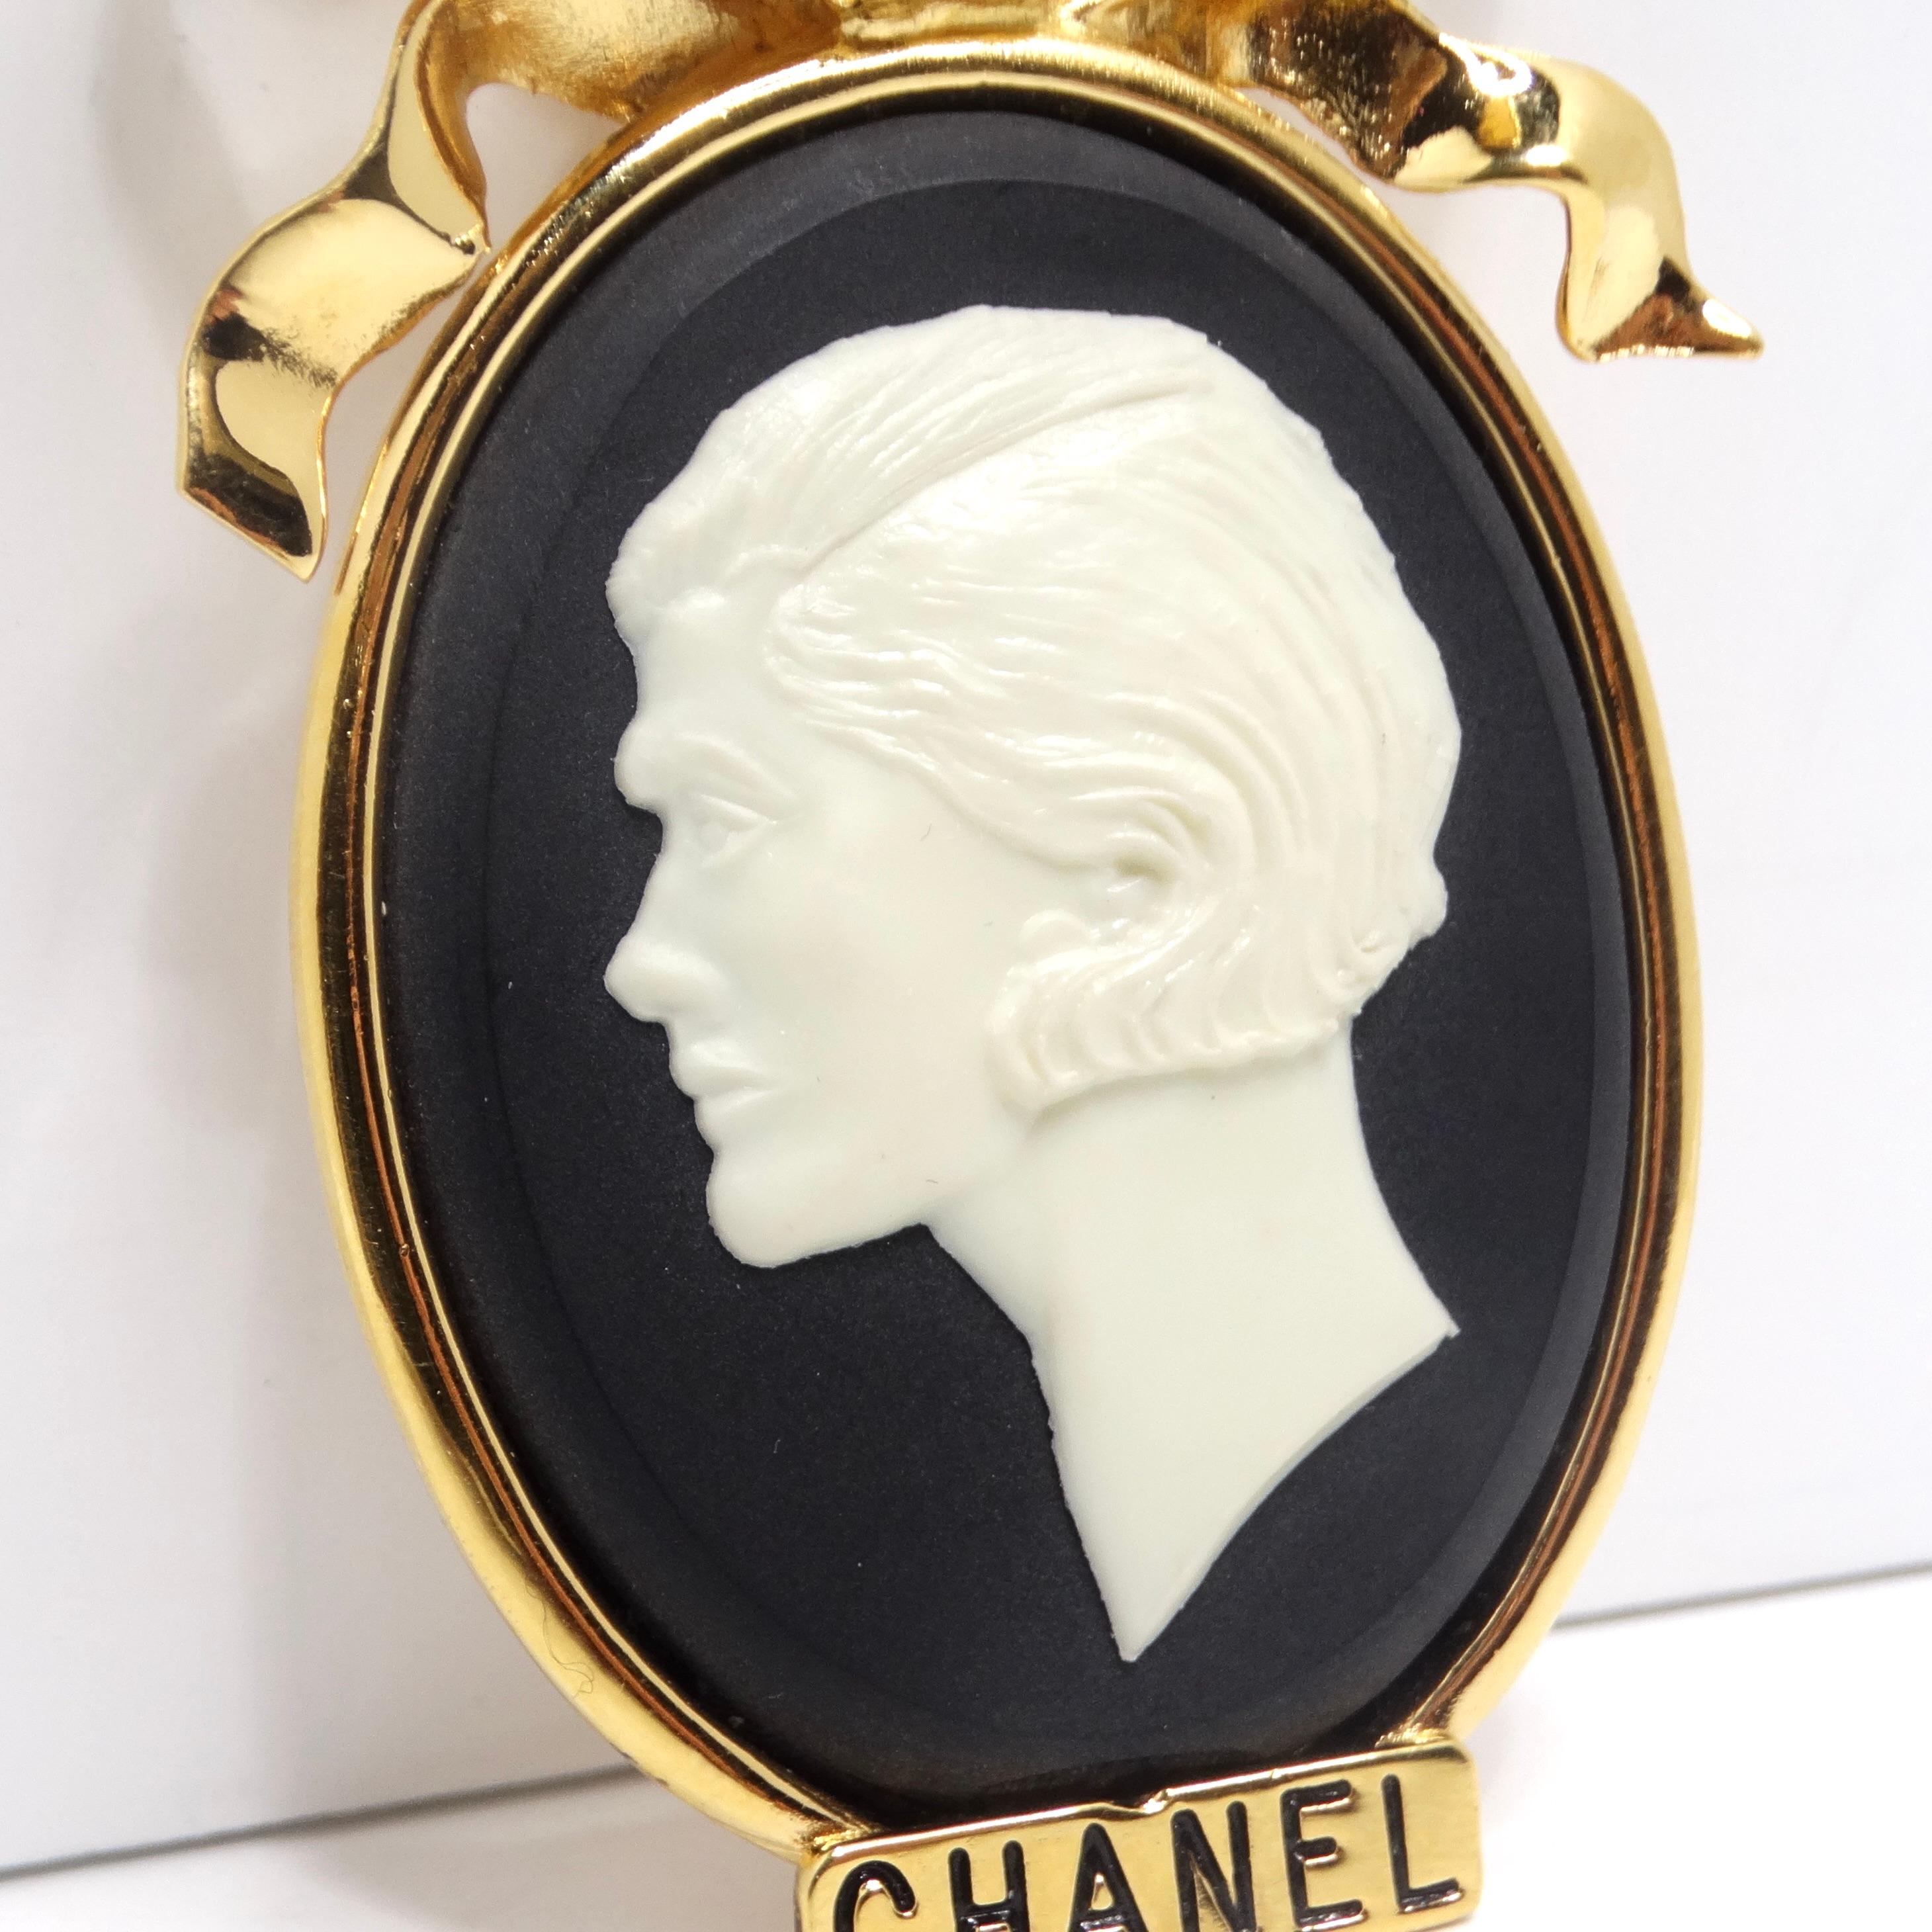 Indulge in the allure of vintage Chanel with the exquisite Chanel 1980s Gold Tone Cameo Brooch. This remarkable brooch is a captivating homage to the iconic Coco Chanel, featuring a black and white large cameo that captures the essence of the